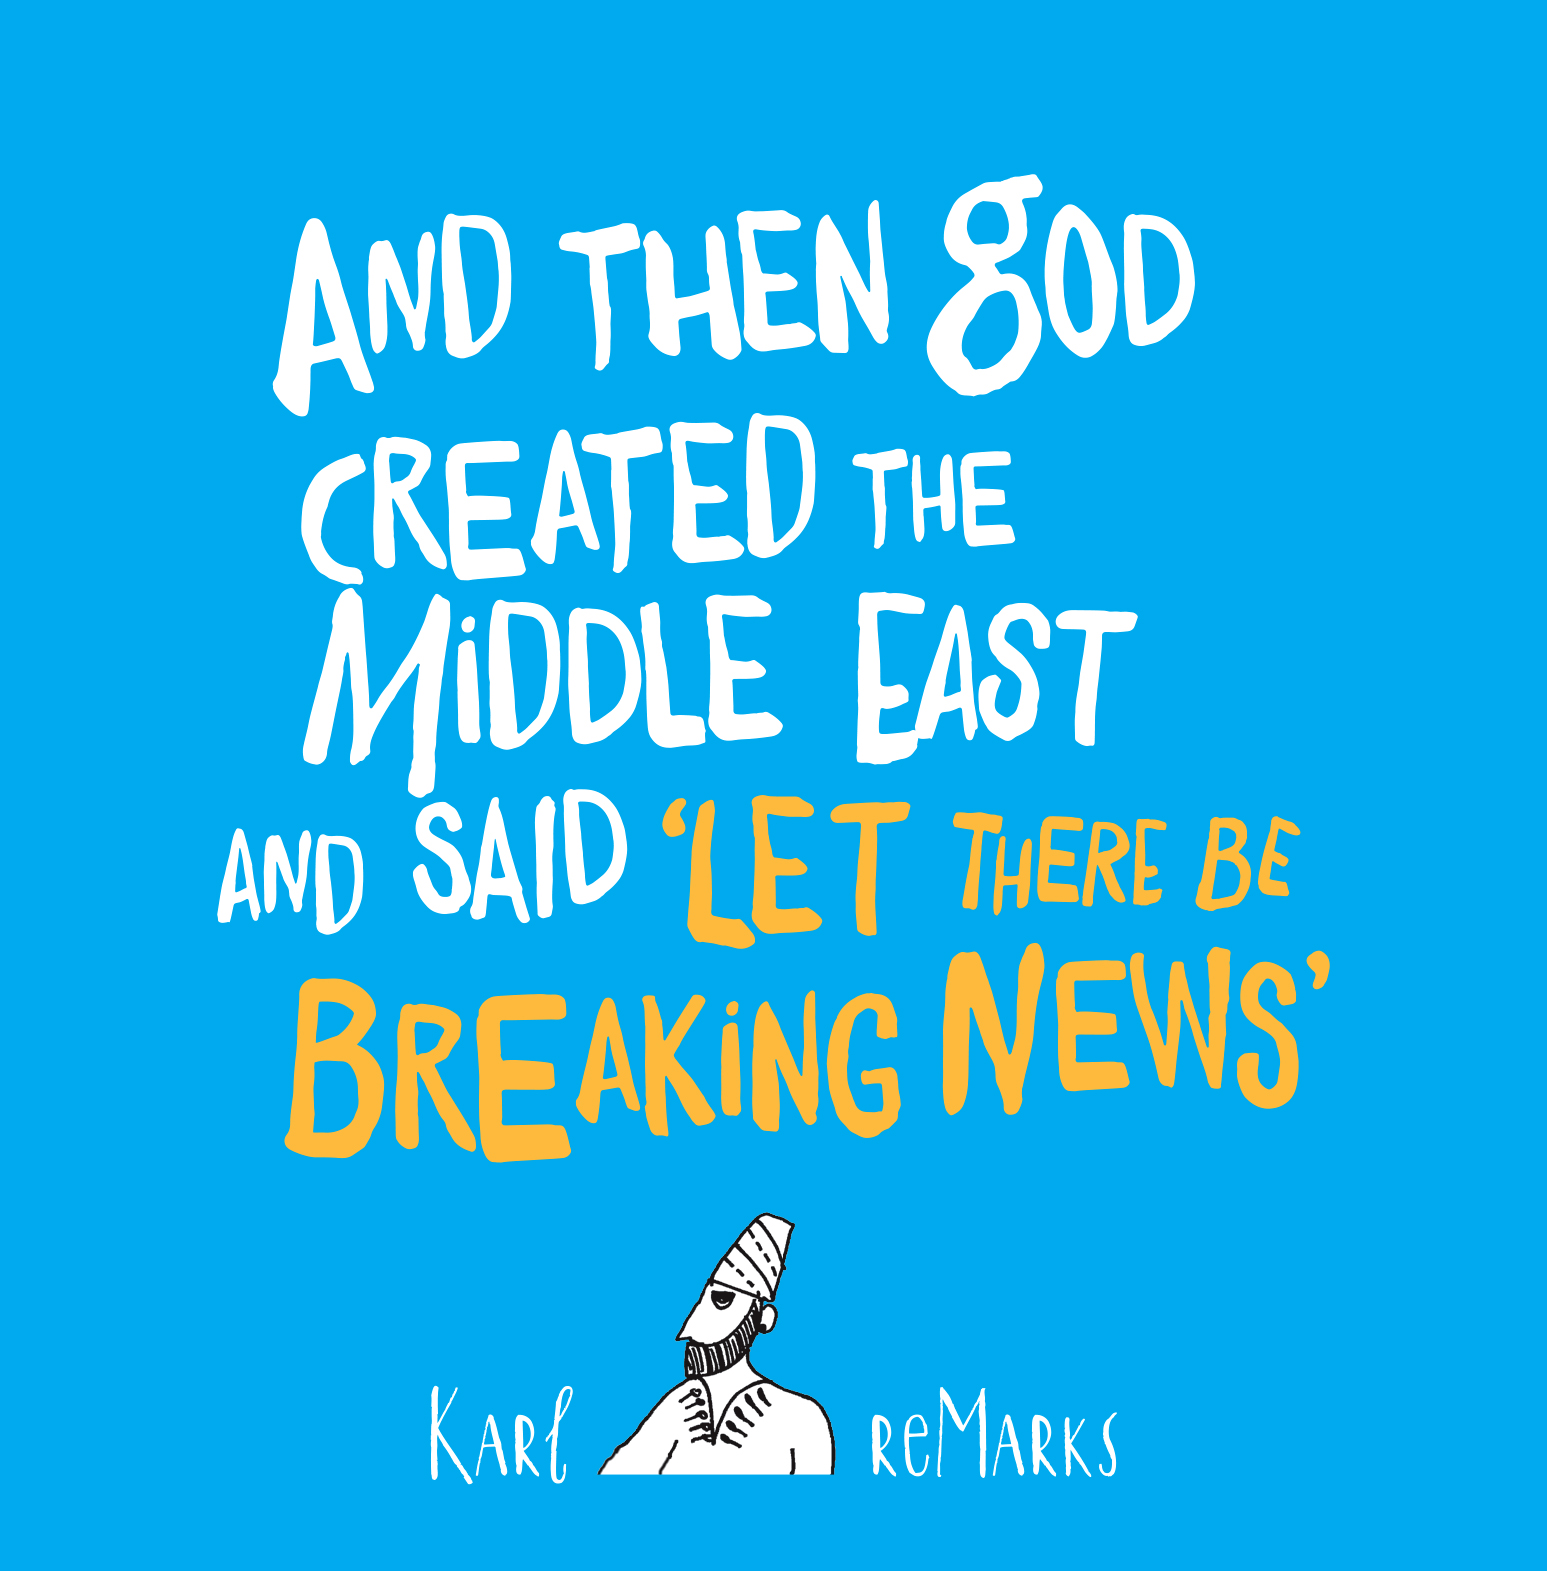 Cover of Karl Sharro's "And Then God Created the Middle East and Said ʹLet There be Breaking Newsʹ" (published by Saqi Books)